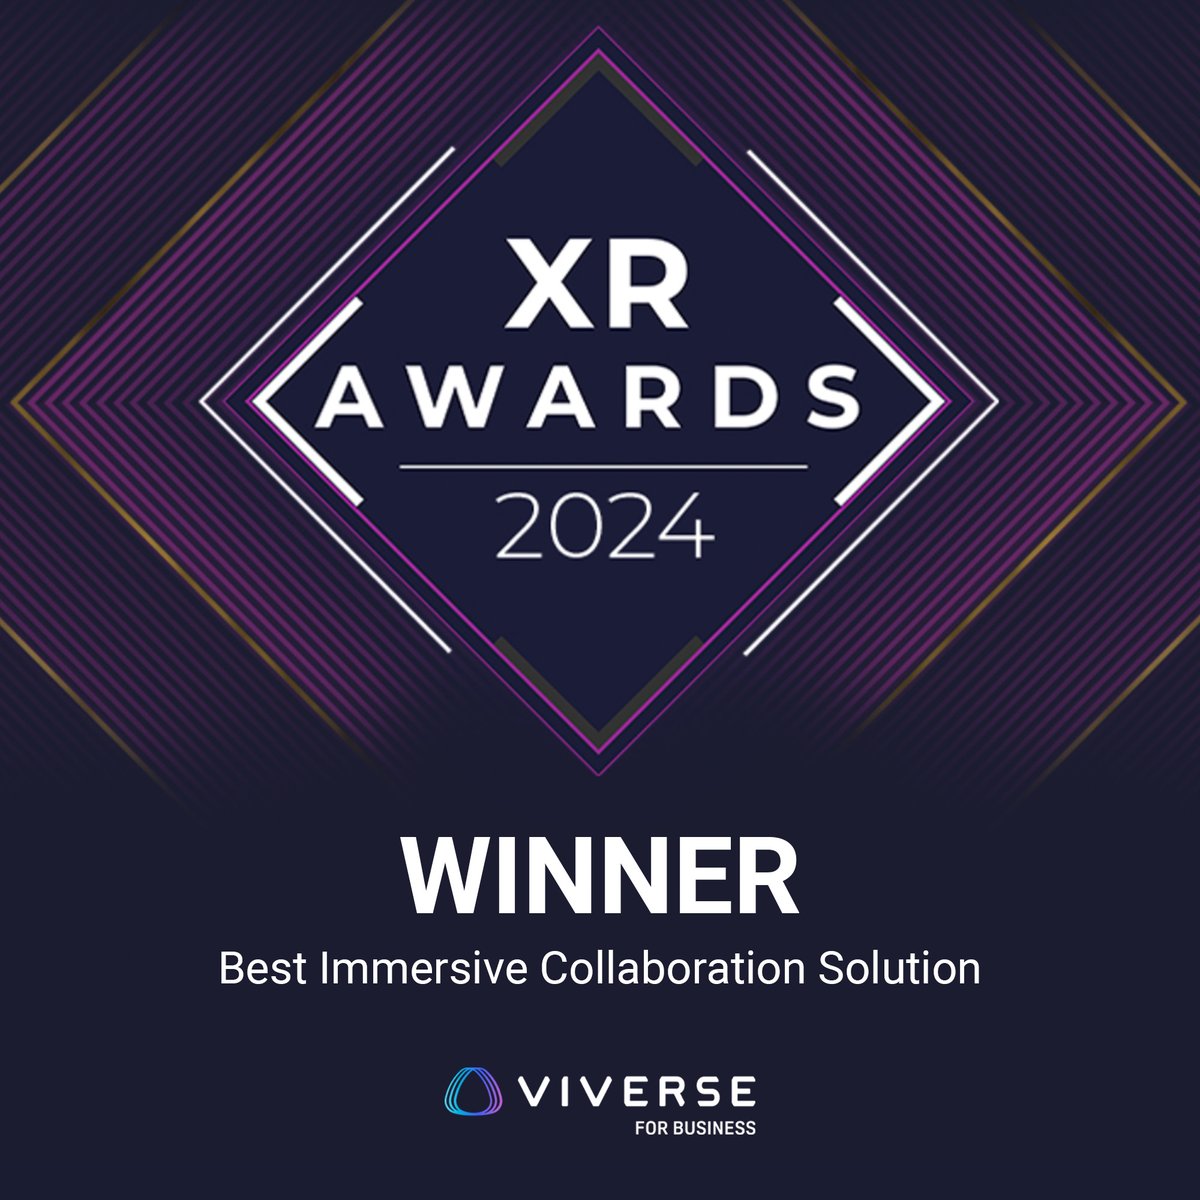 The winners of the #XRAwards24 by @Xrtoday have been announced, and we're delighted that VIVERSE for Business has won the accolade for Best Immersive Collaboration Solution! 🏆 htcvive.co/VFBT #XRAwards24 #XRToday #VR #XR #VIVERSE #VIVERSEforBusiness